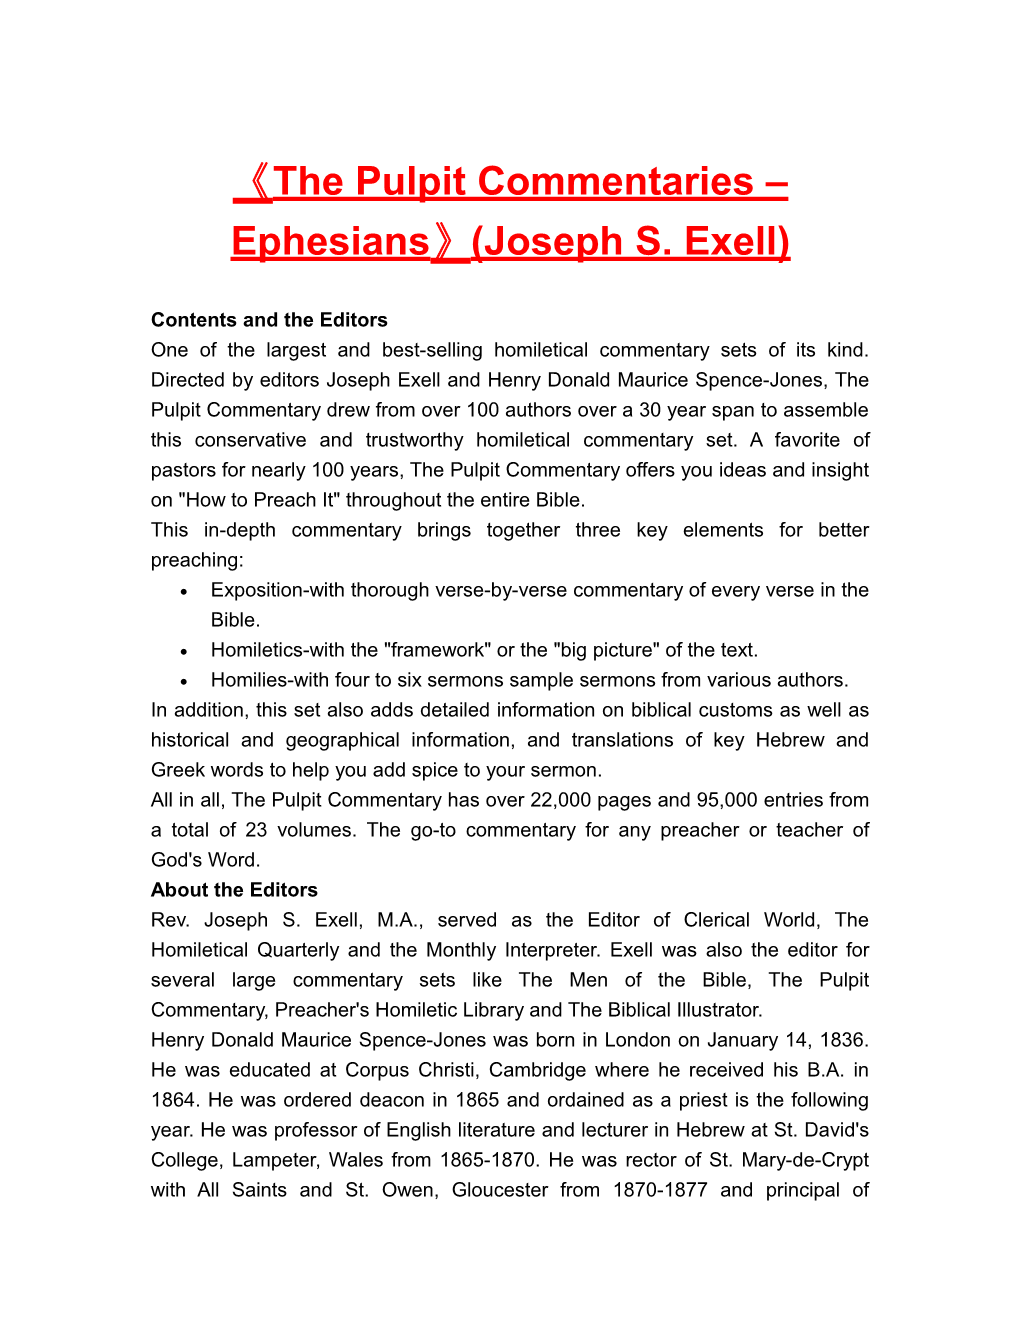 The Pulpit Commentaries Ephesians (Joseph S. Exell)